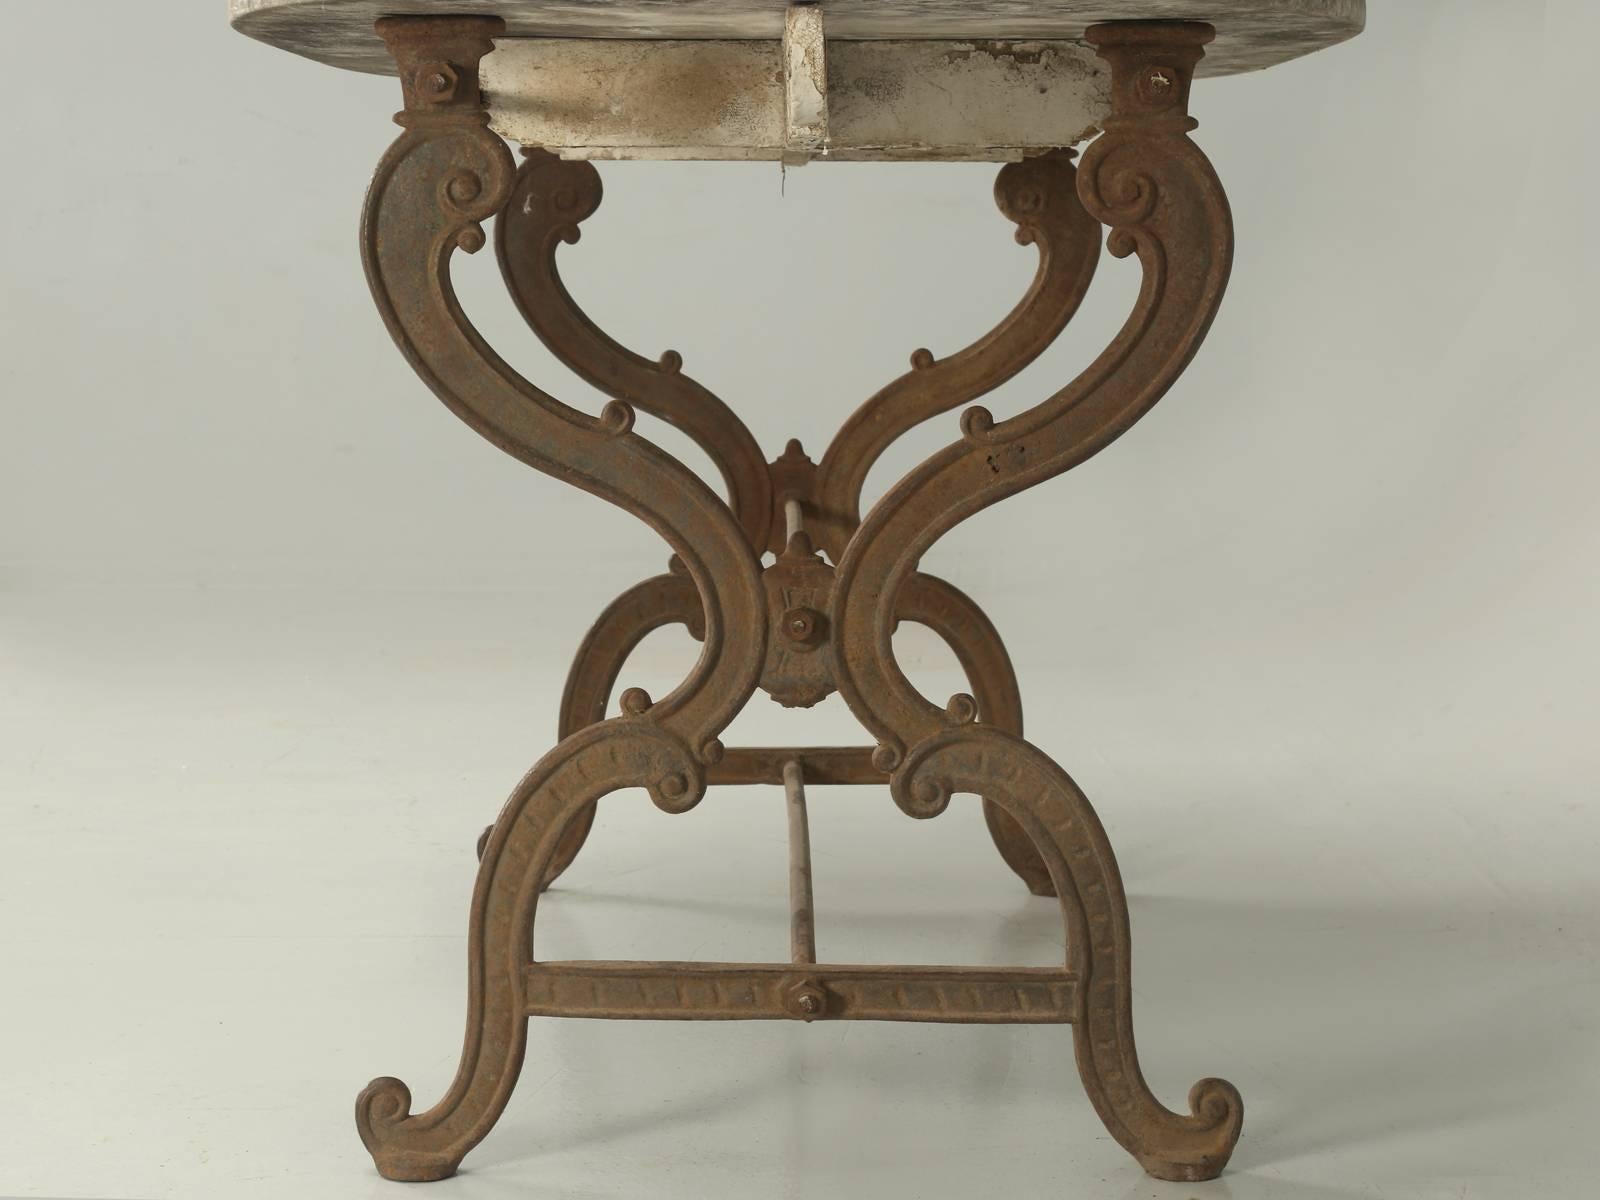 Early 20th Century Antique French Outdoor Garden Table with a Marble Top